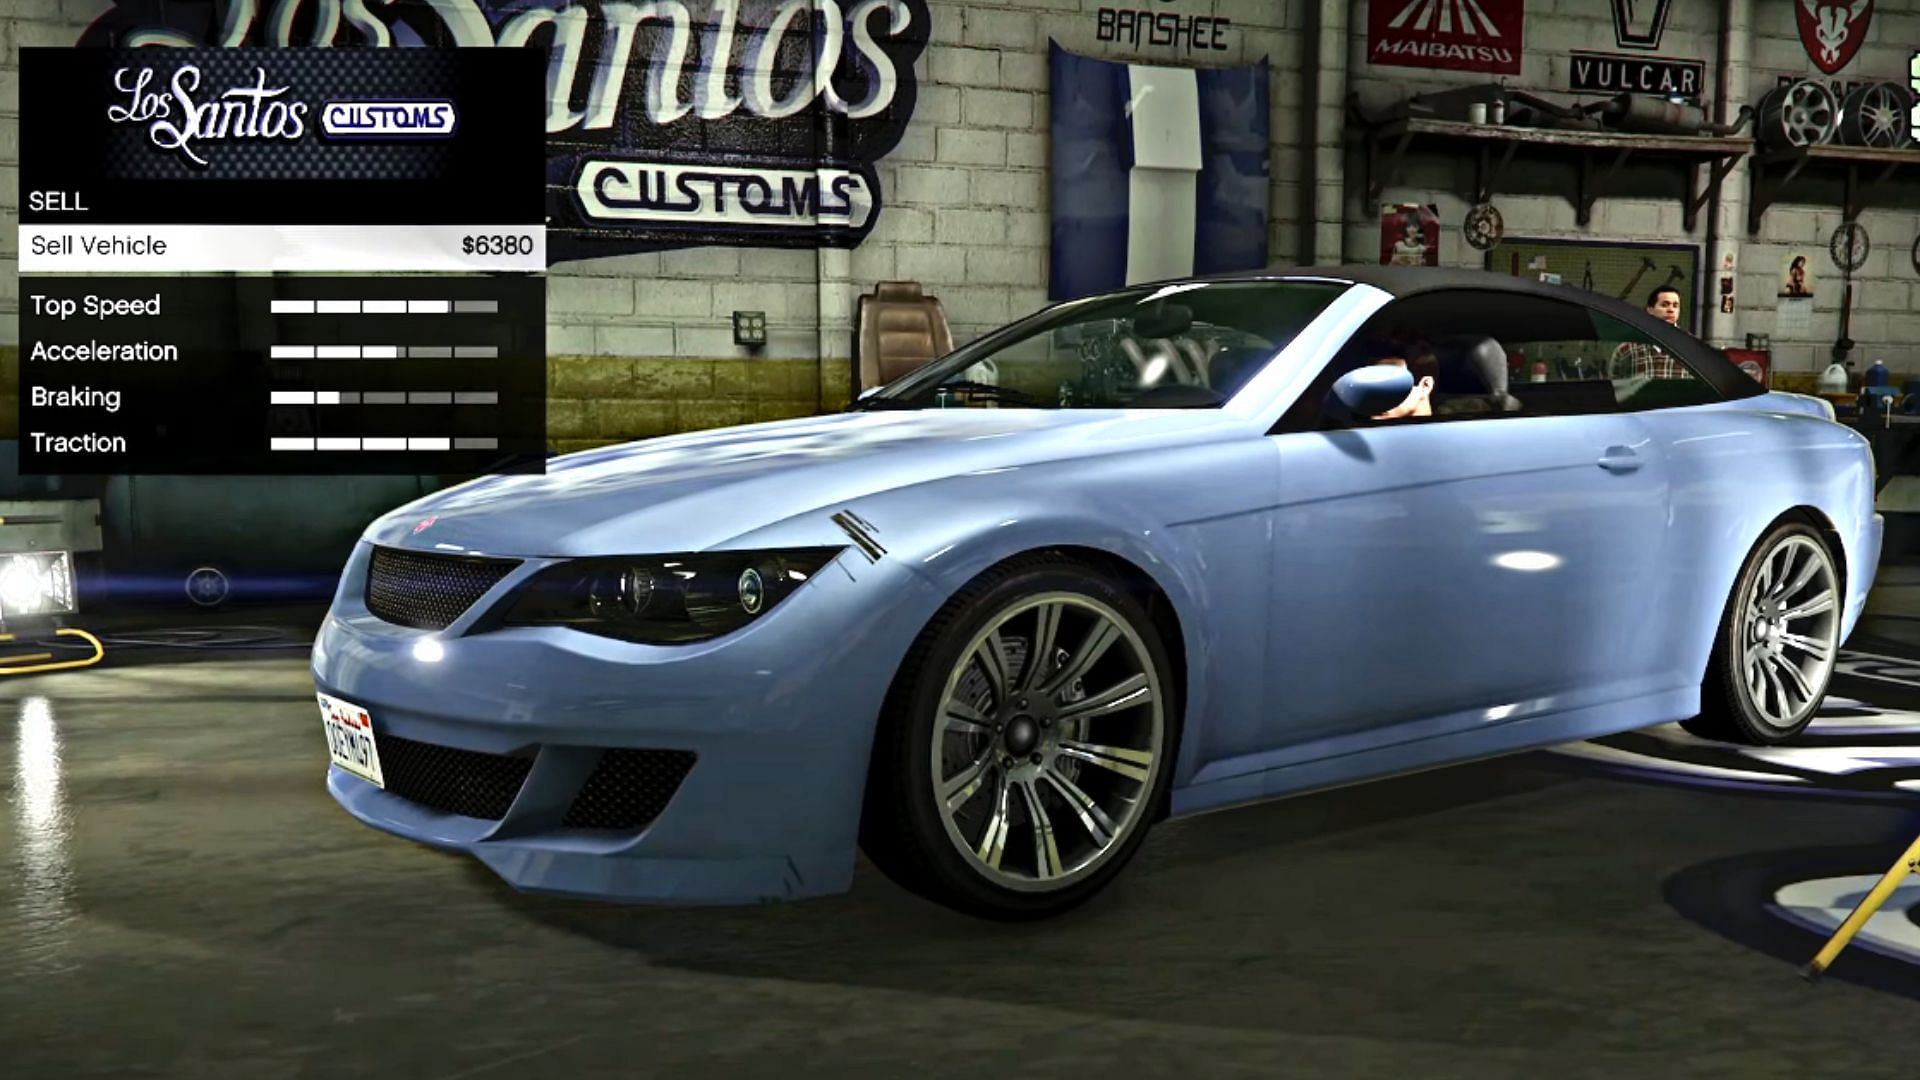 LS Customs selling page (Image via YouTube/GrubMagnet Gaming)